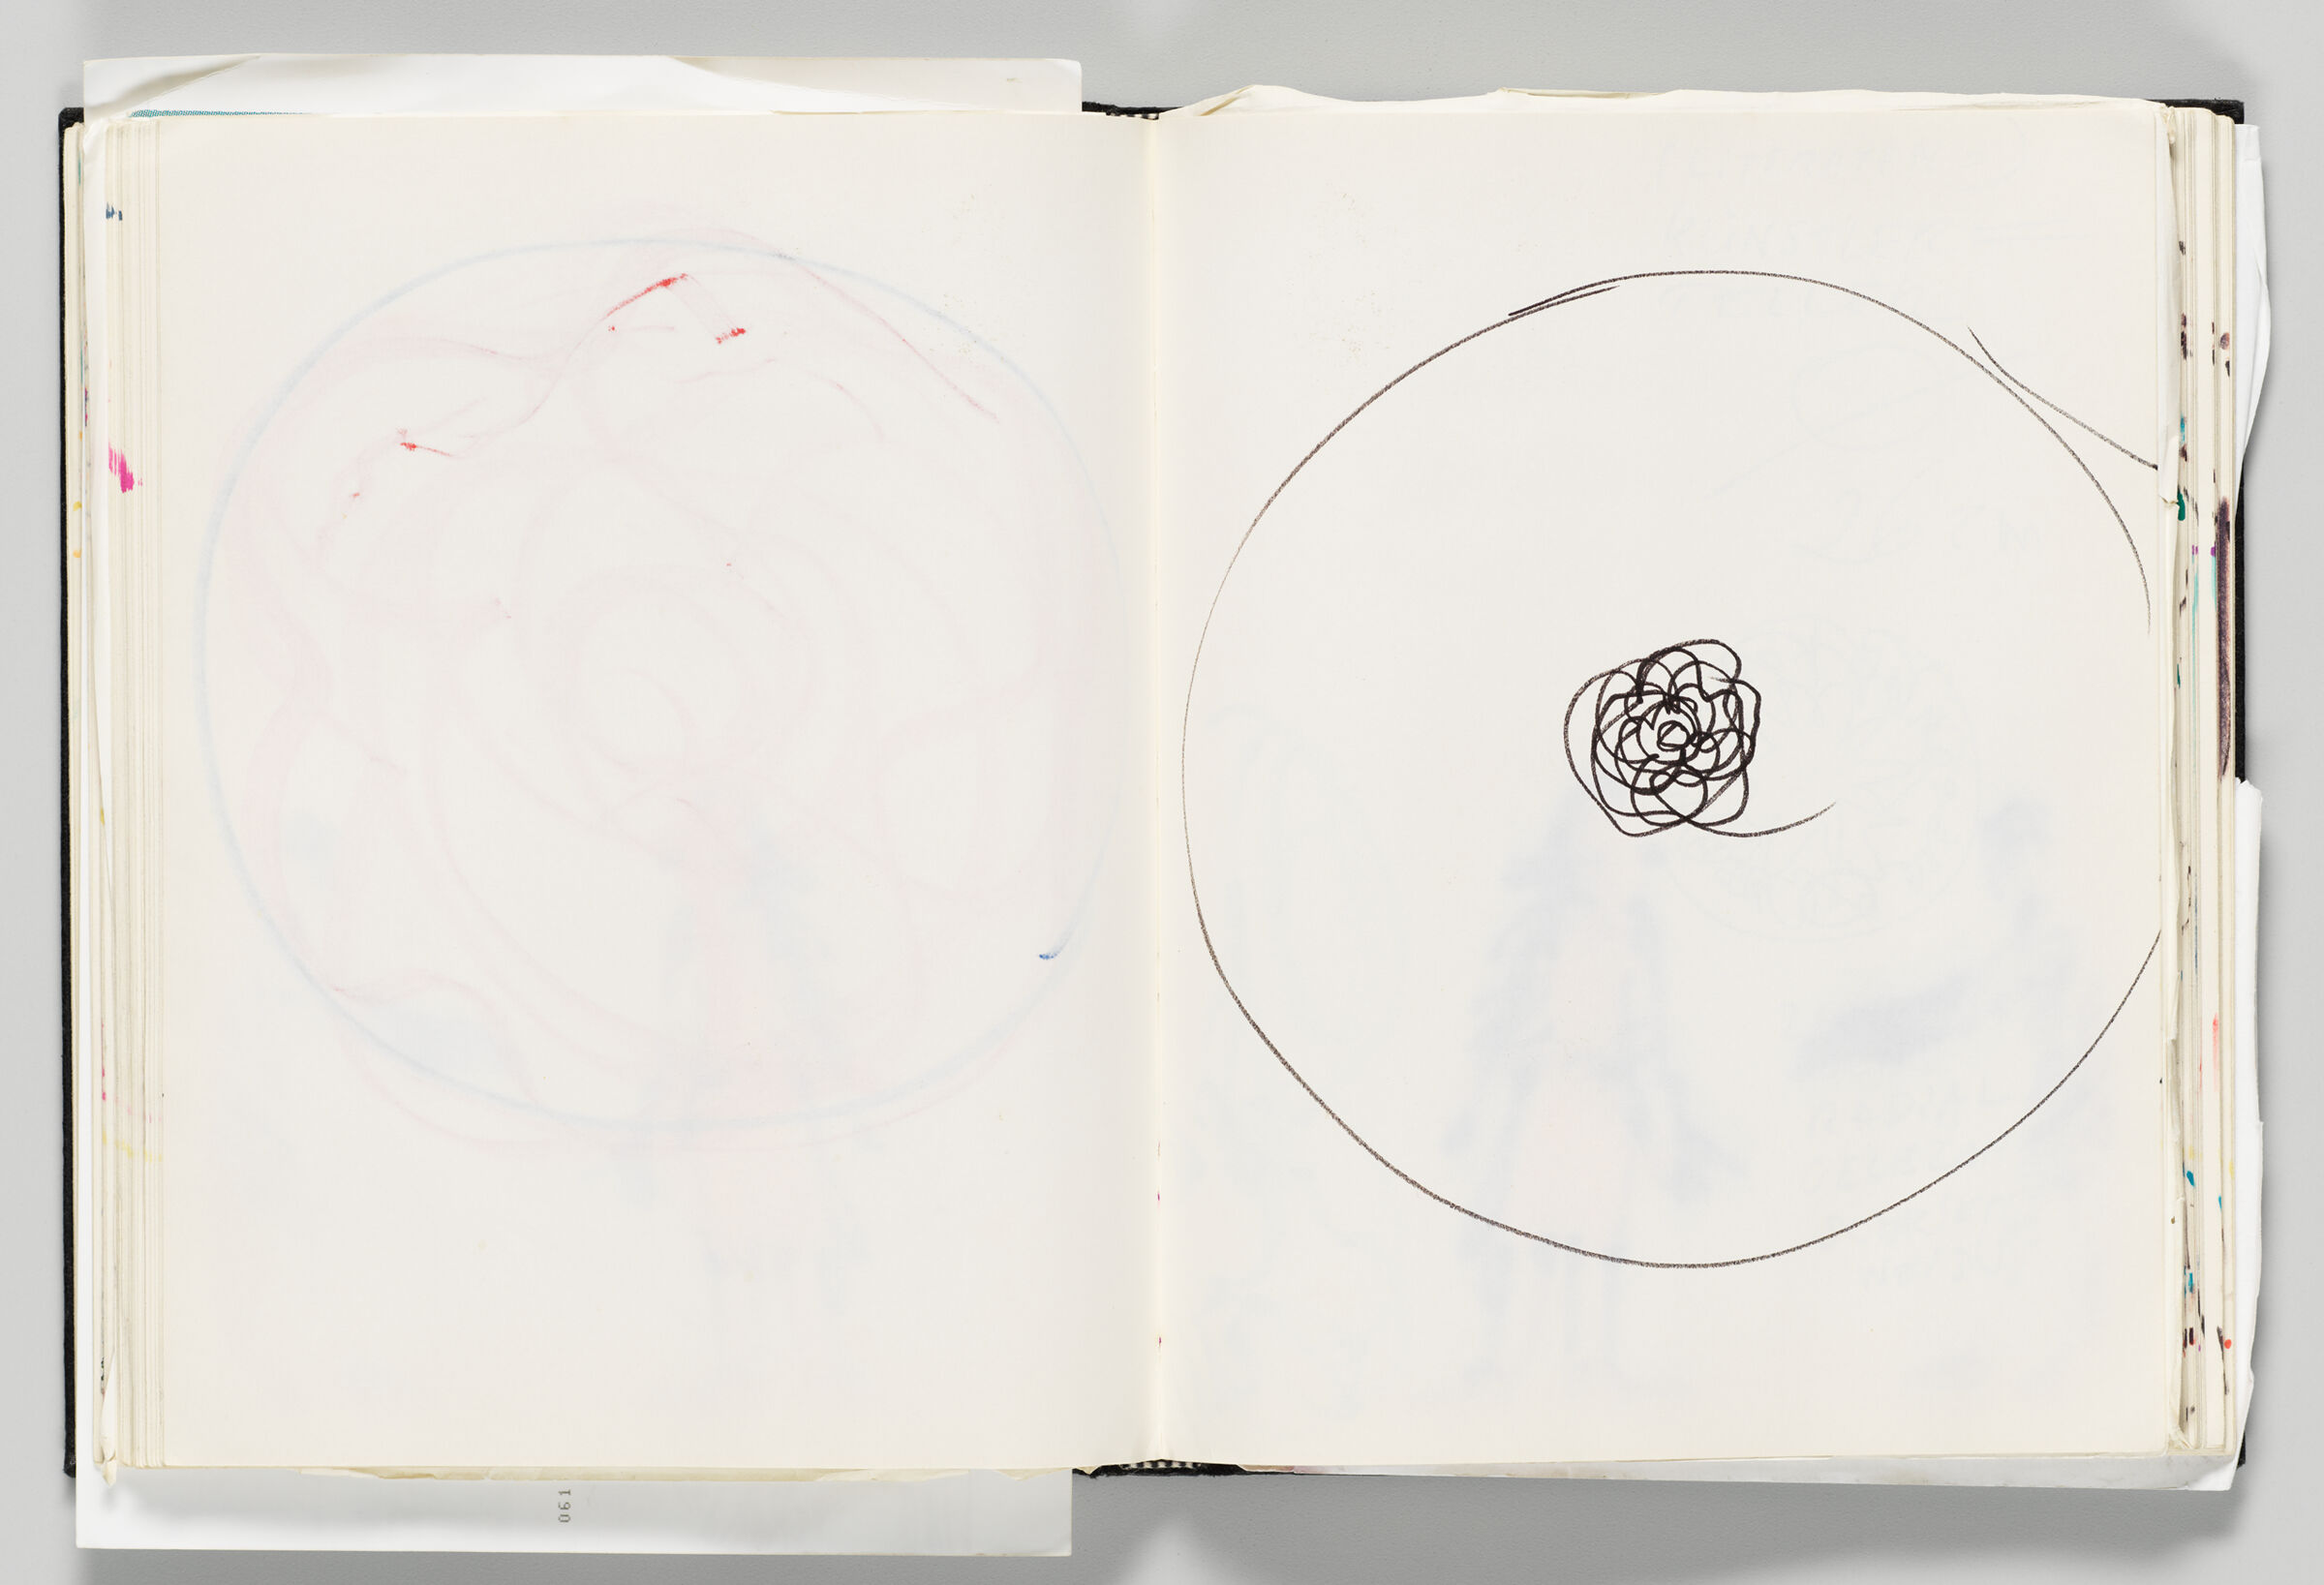 Untitled (Bleed-Through Of Previous Page, Left Page); Untitled (Design For Rosenthal Plate, Right Page)